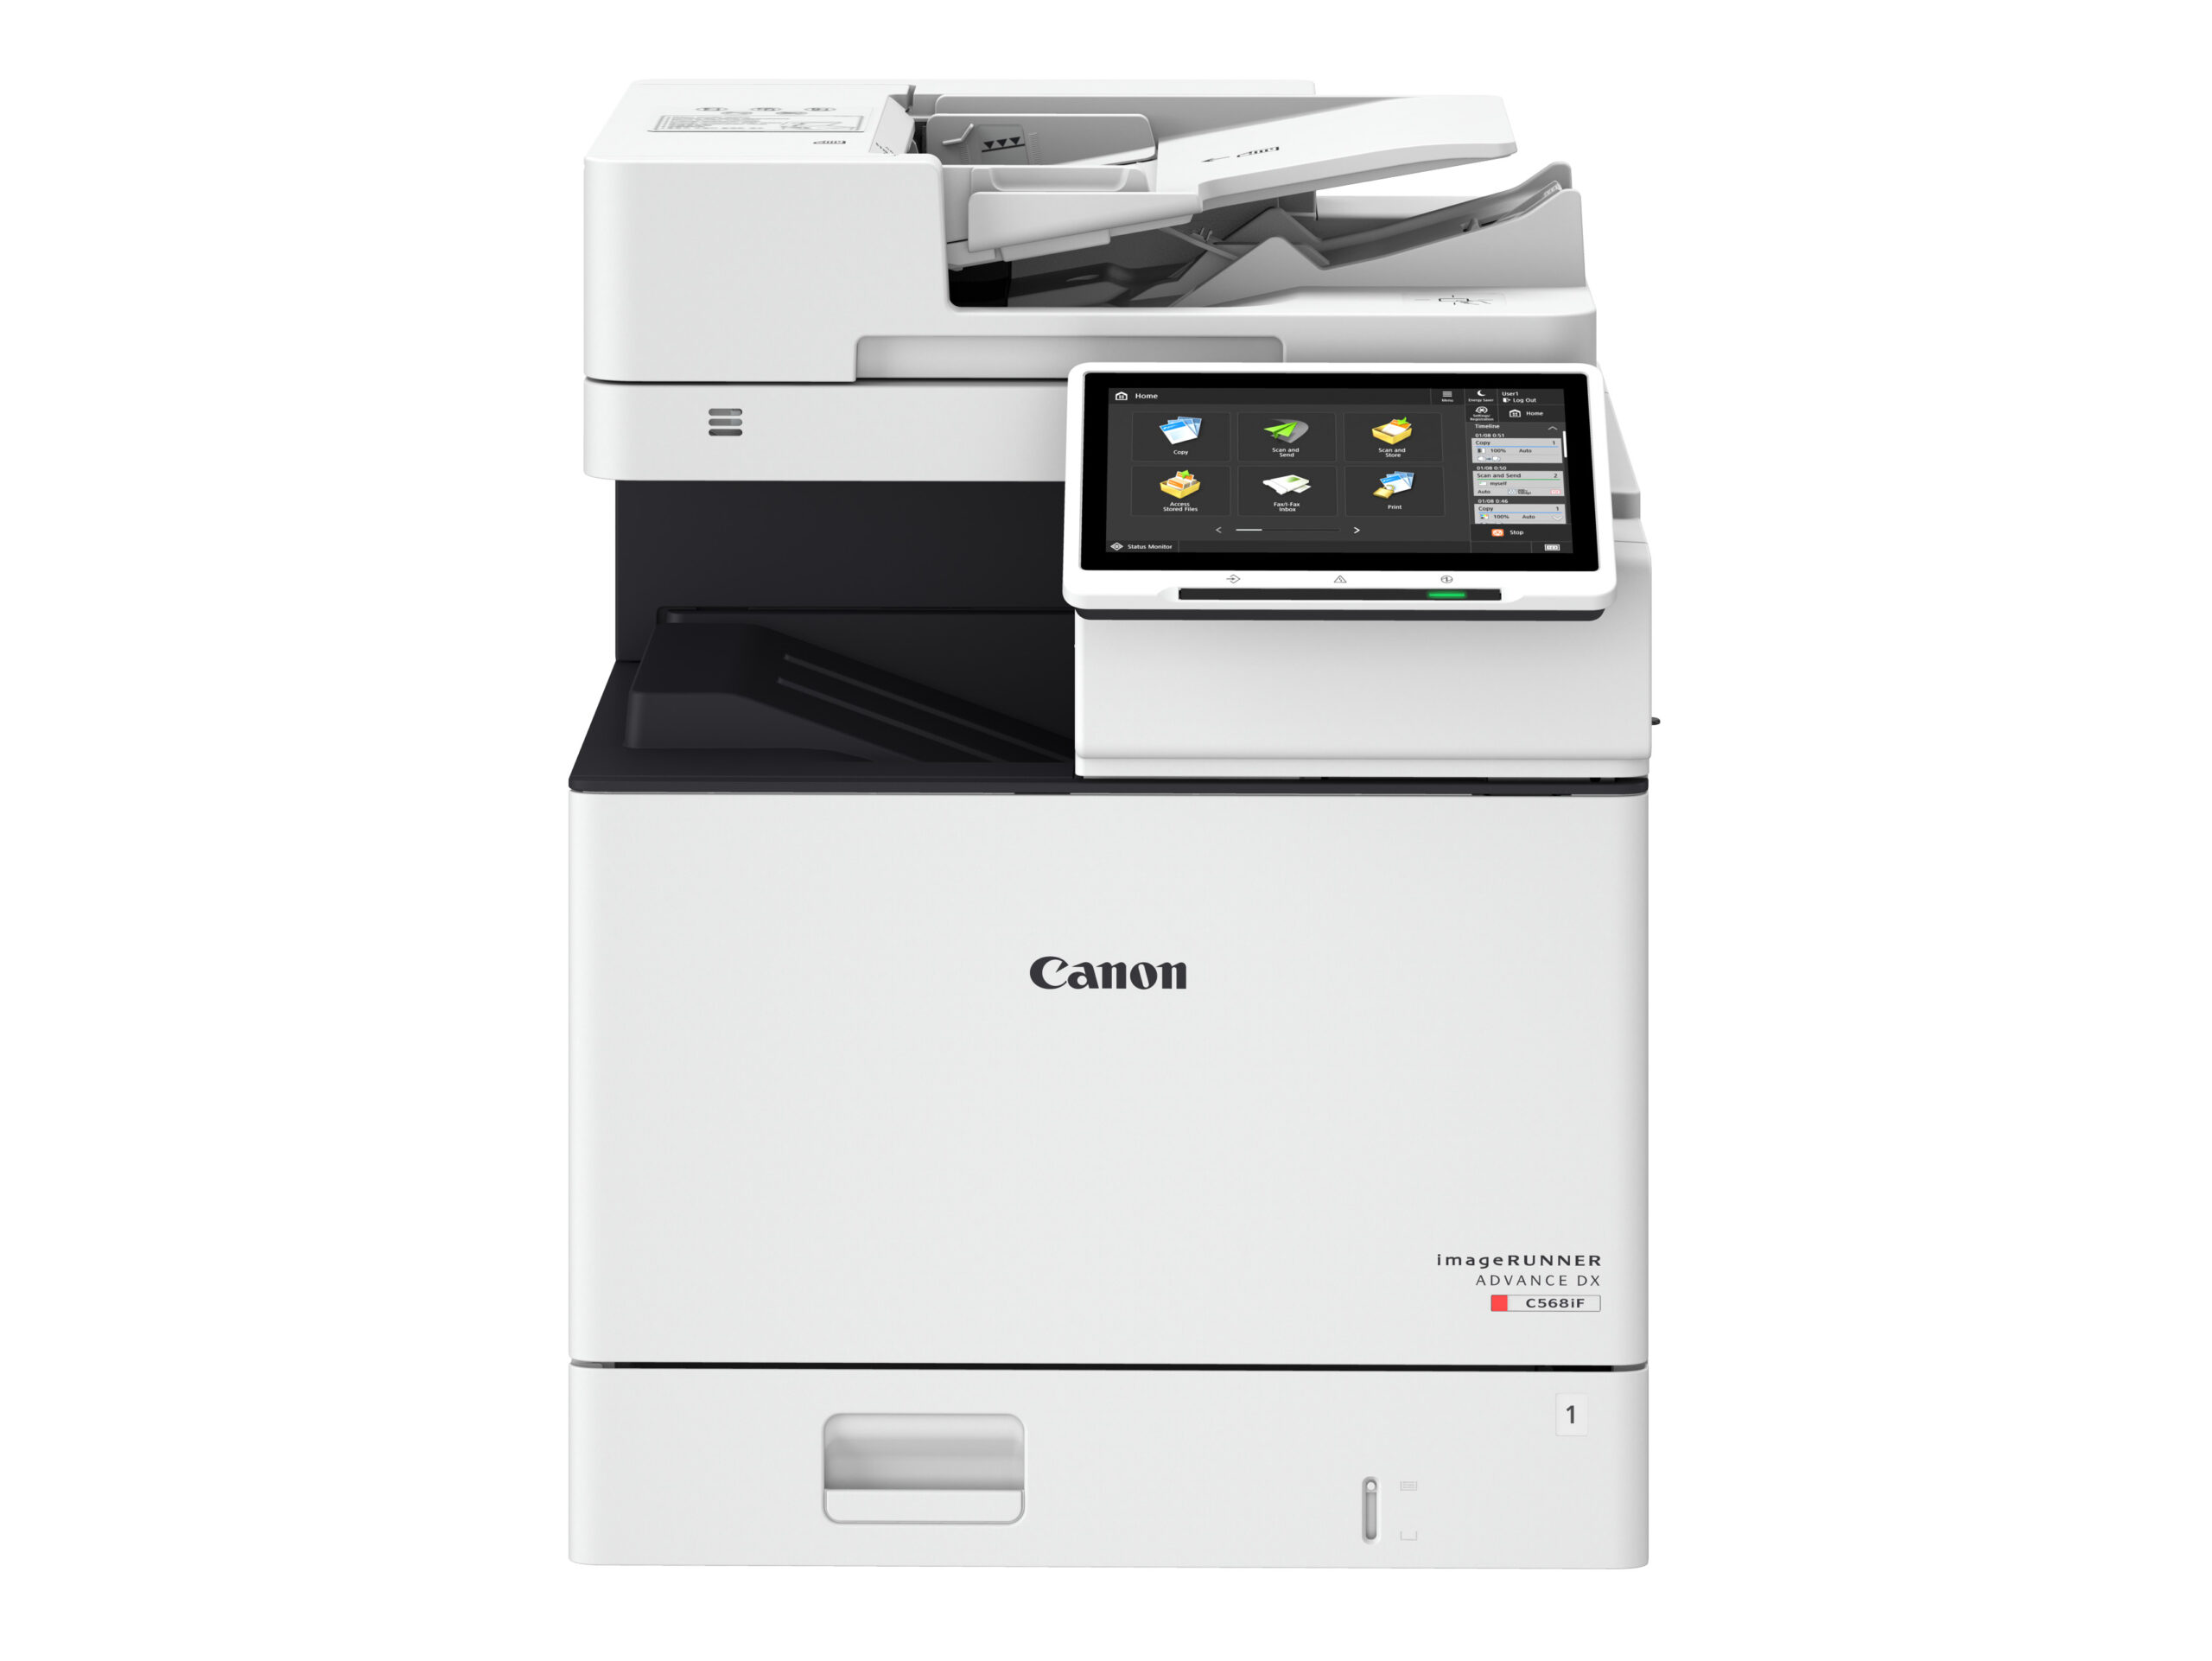 Featured image for “Elevate Your Indianapolis Office with                   Canyon Falls Business Solutions:Introducing the Canon  DX C568iF Series”